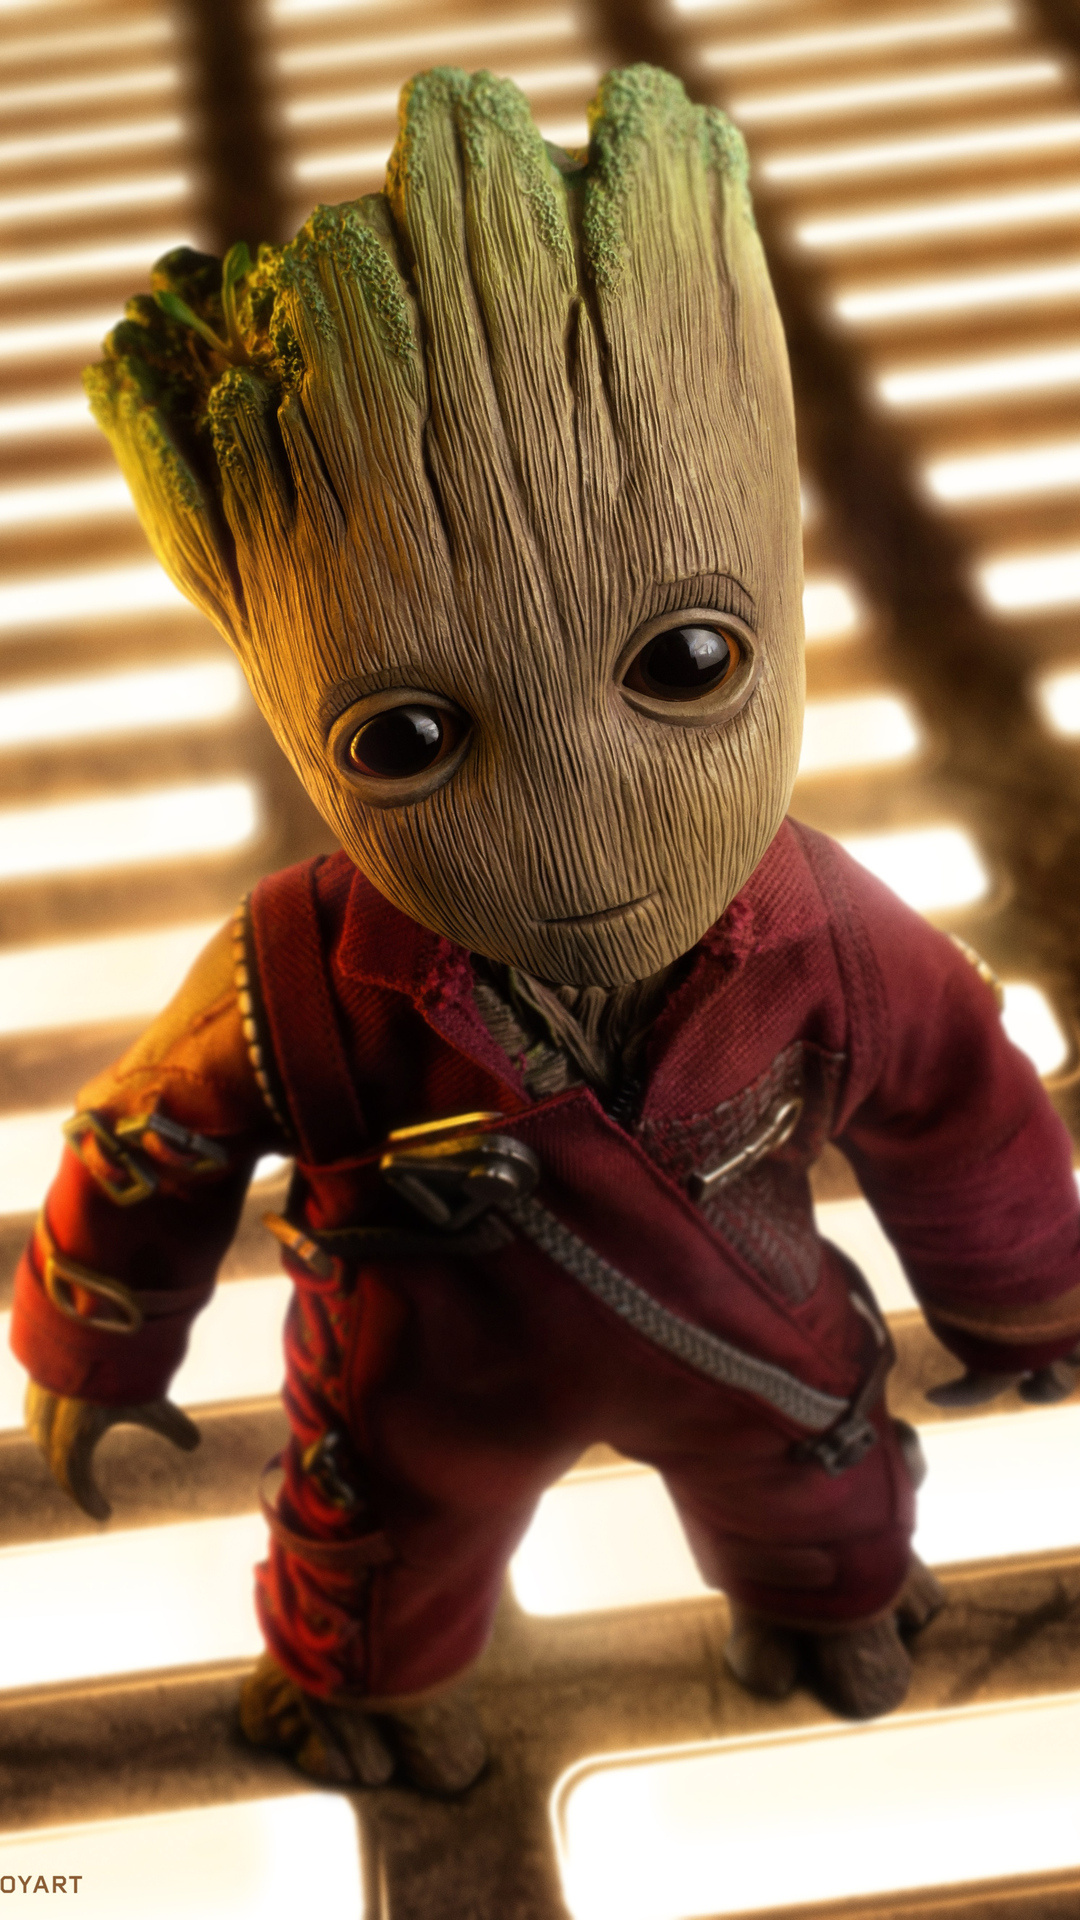 4K Baby Groot, Cute iPhone wallpapers, High-quality images, Marvel character, 1080x1920 Full HD Handy